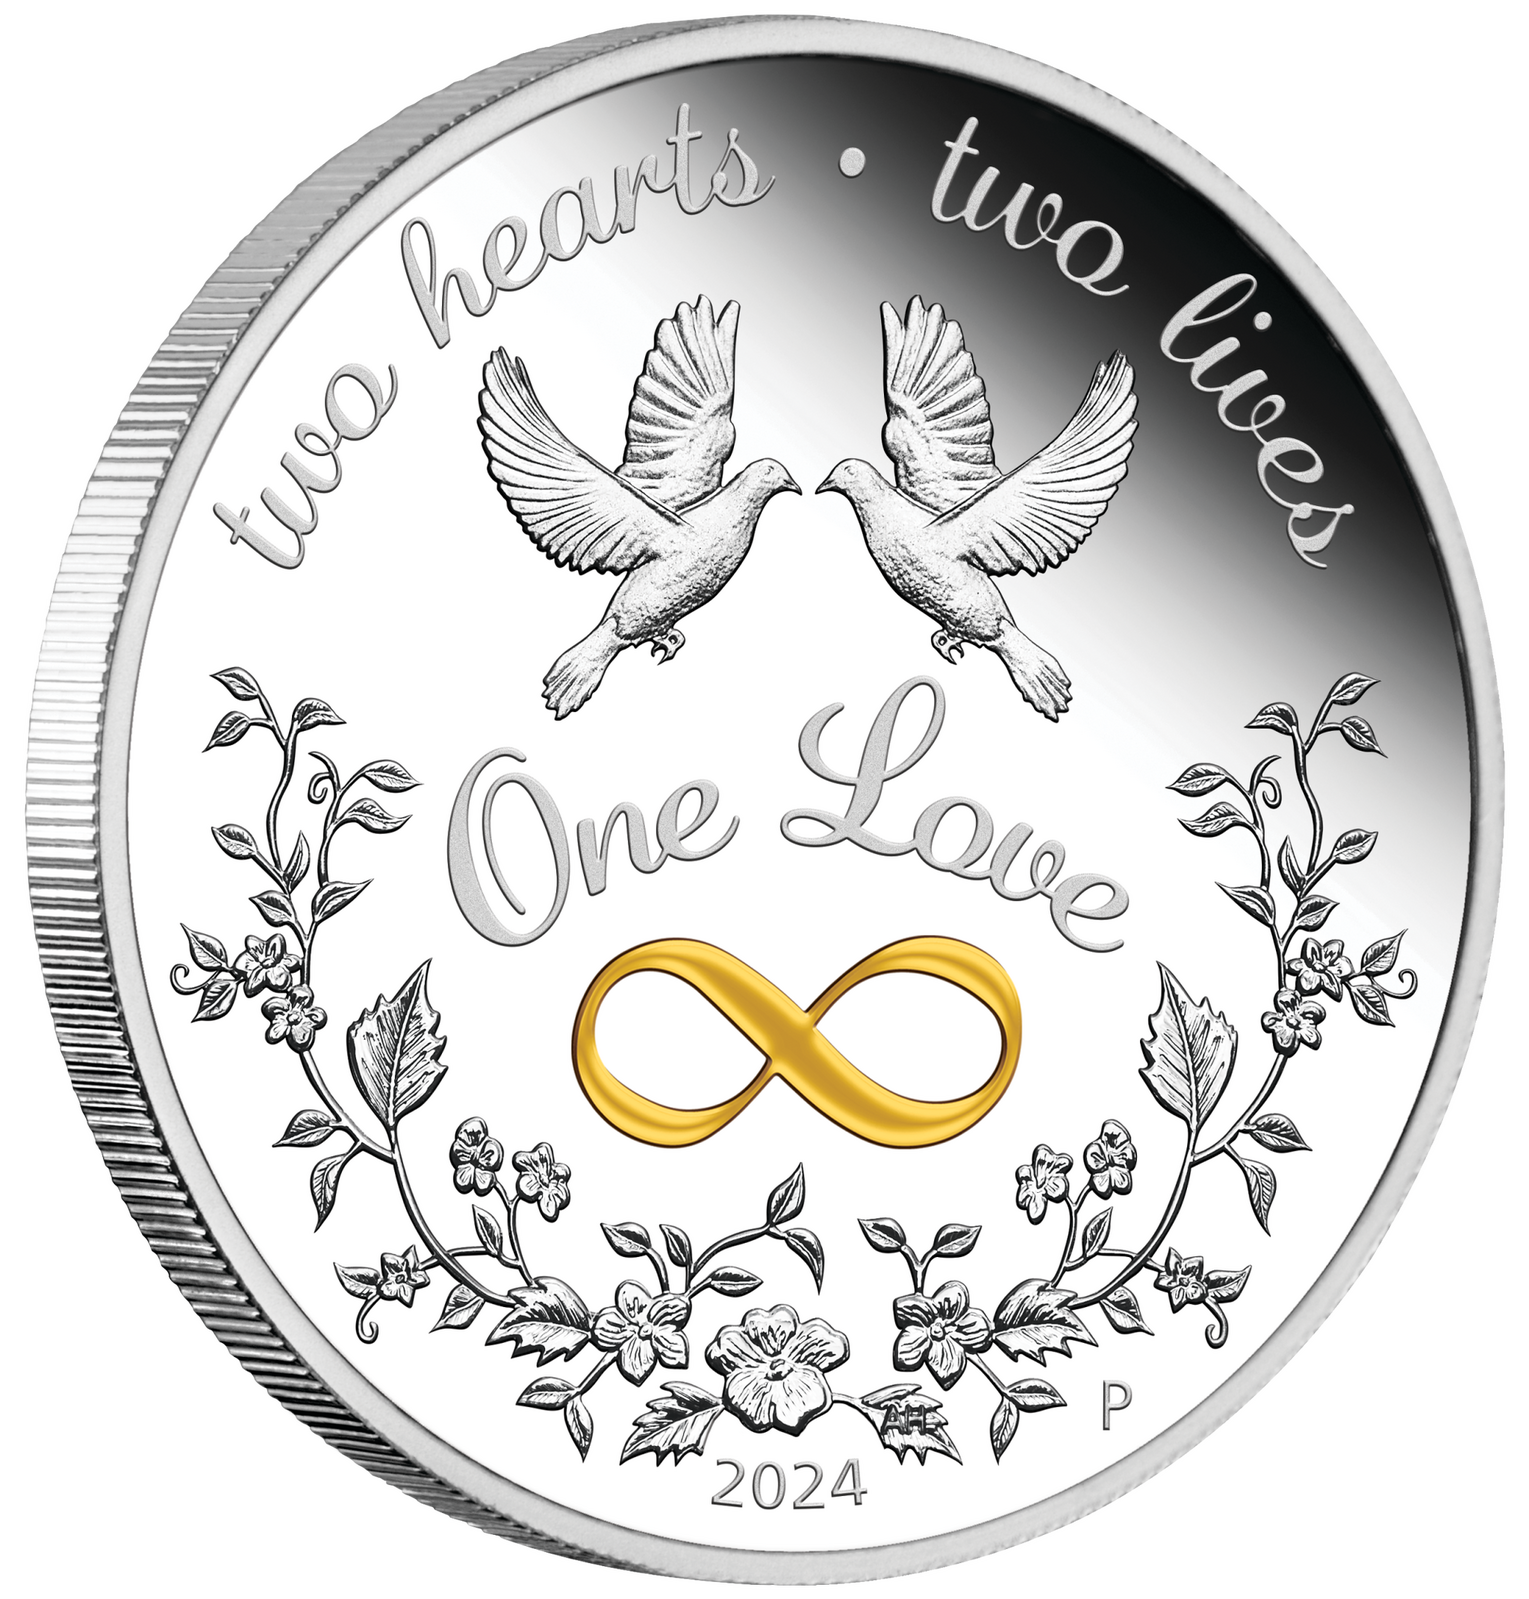 2024 One Love 1oz Silver Proof Coin